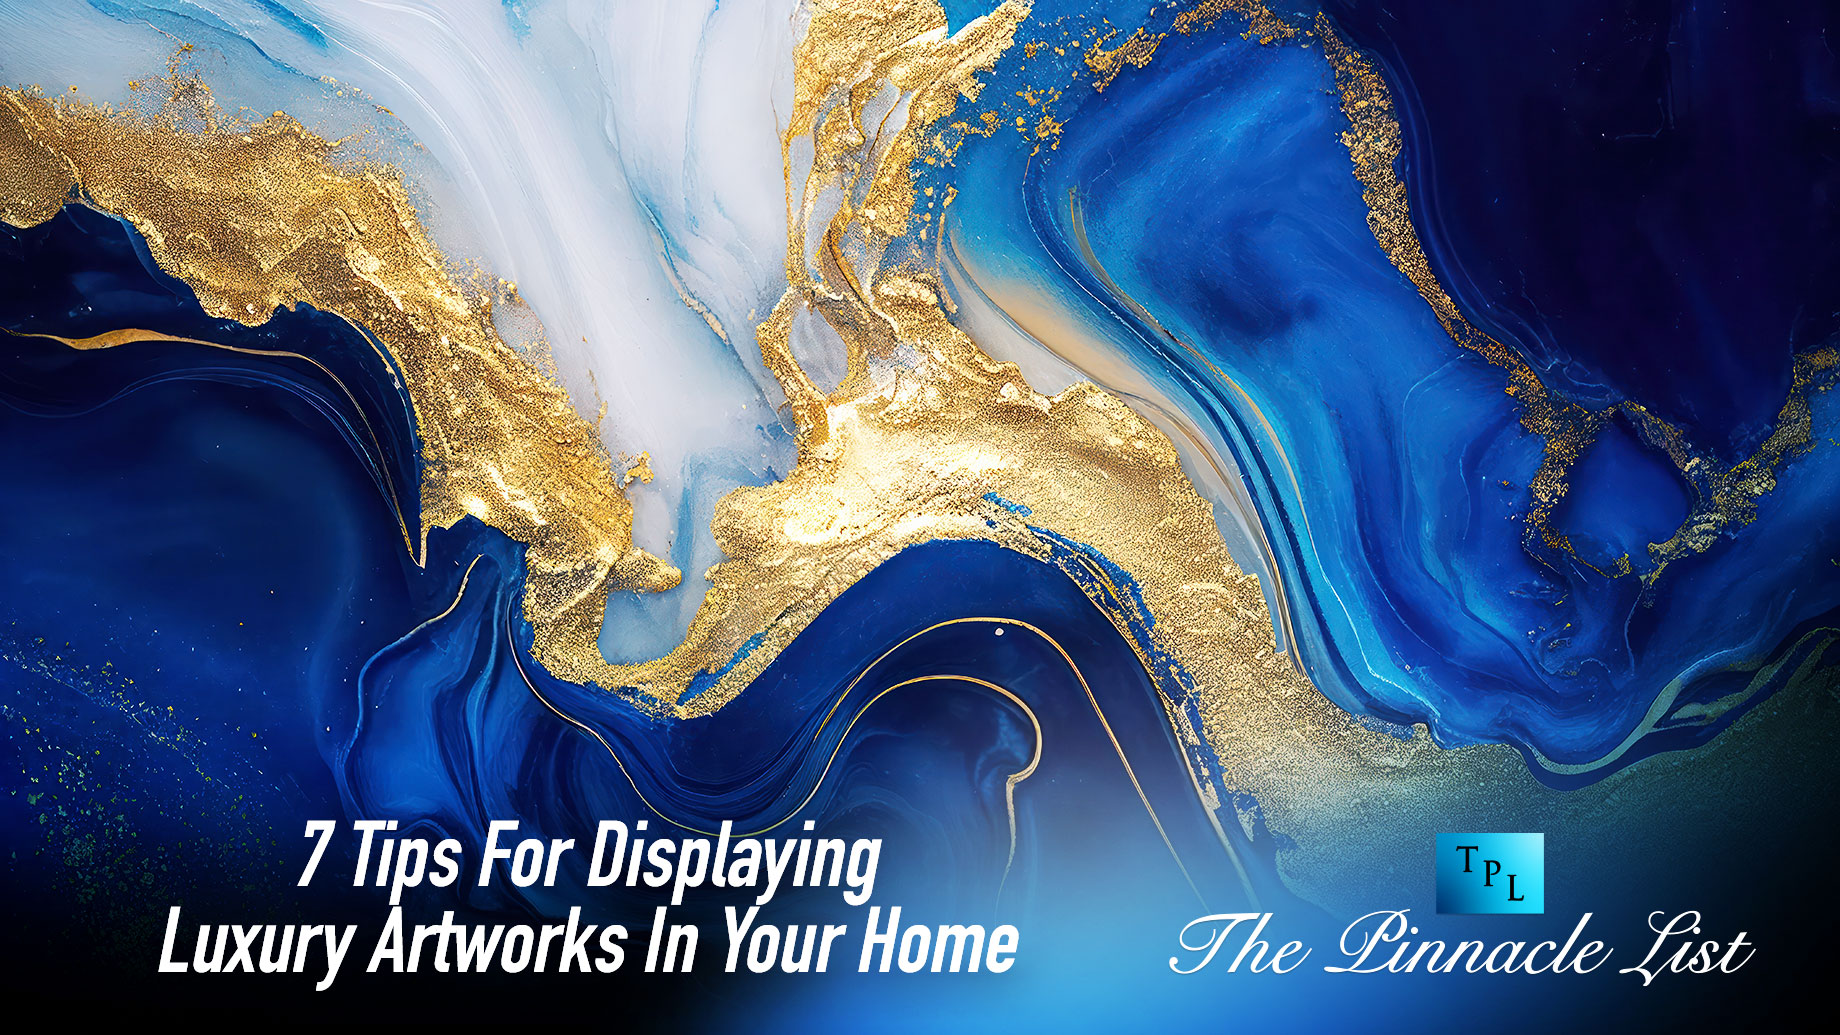 7 Tips For Displaying Luxury Artworks In Your Home